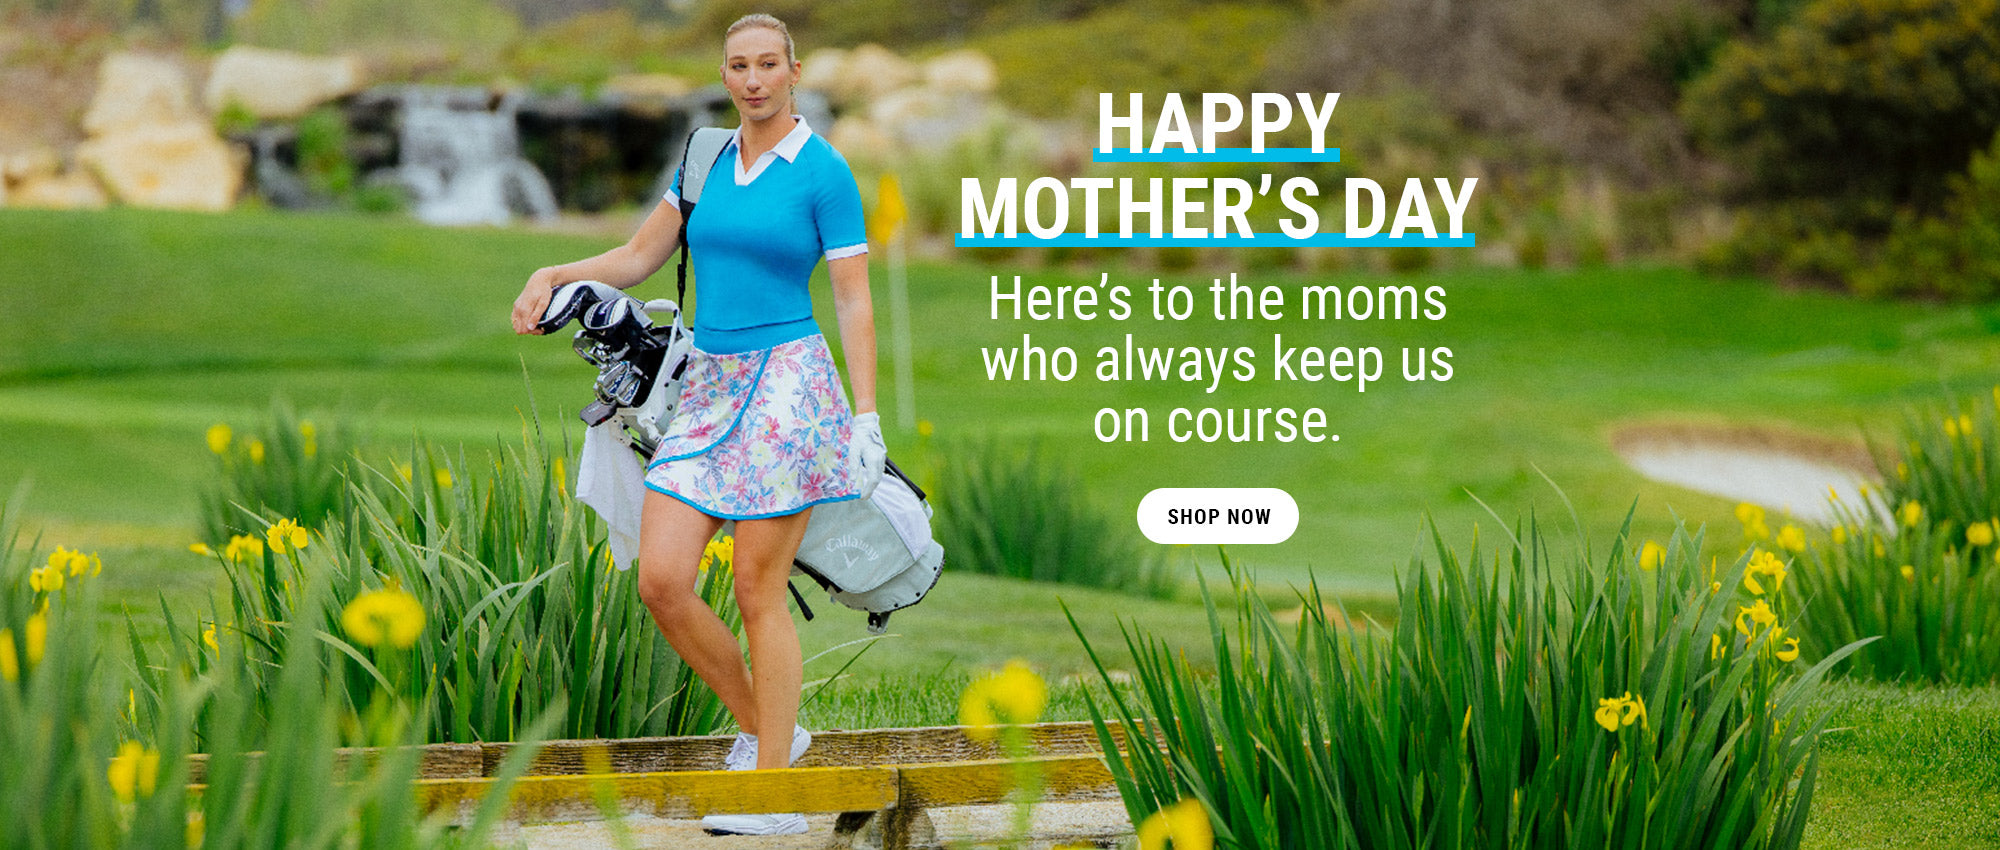 HAPPY MOTHER'S DAY- Here's to the moms who always keep us on course.